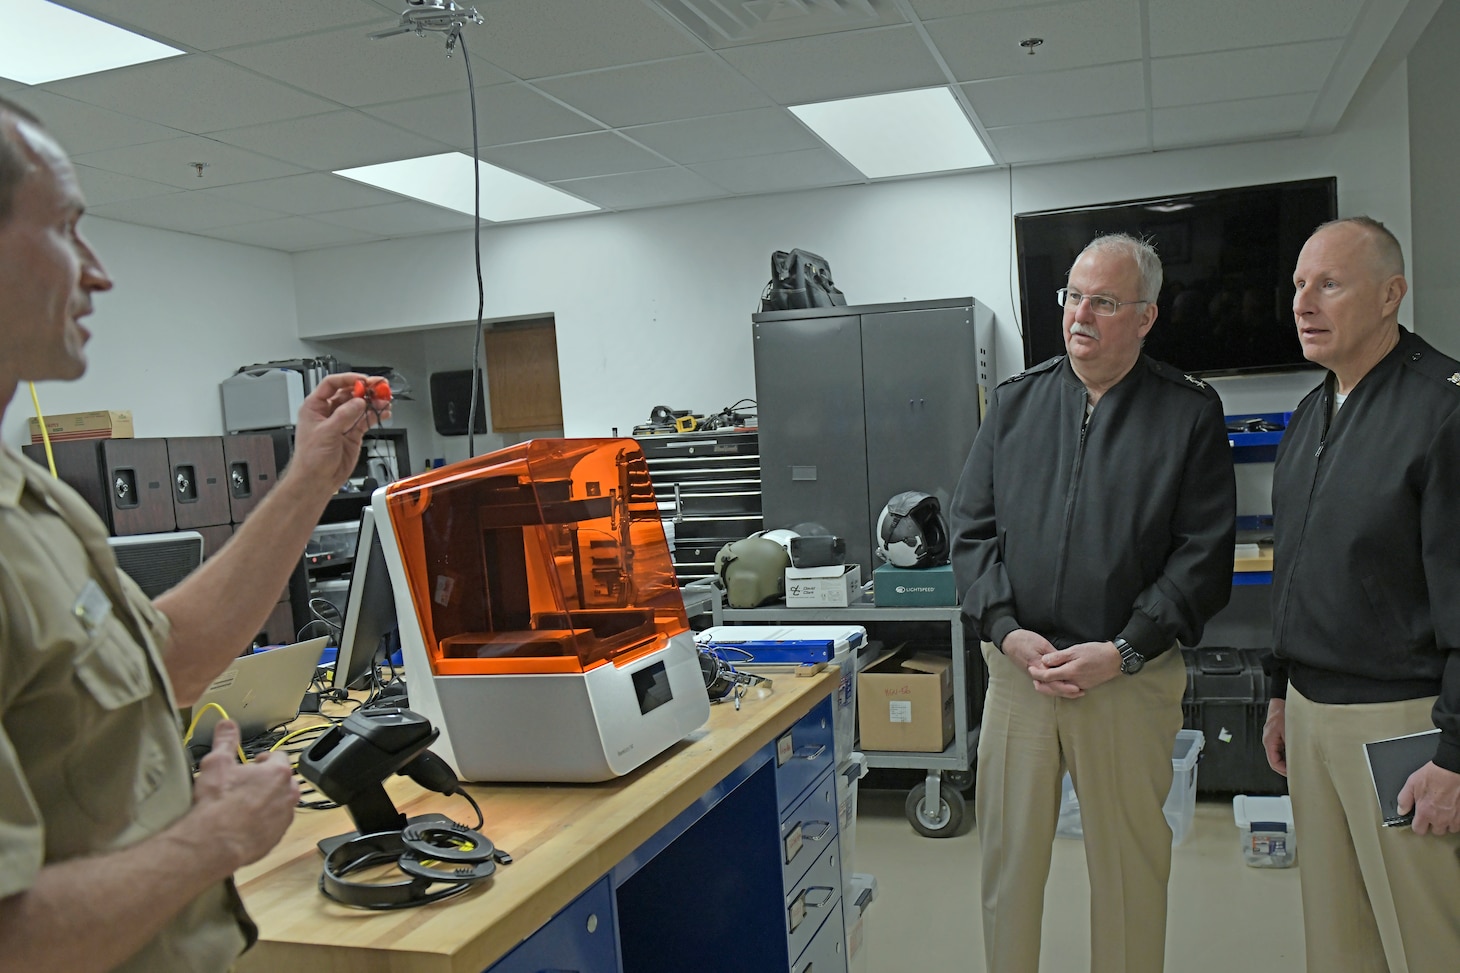 Lt. Cmdr. Kyle Shepard, resident audiologist and researcher at the Naval Air Warfare Center Aircraft Division, describes a simple process for the Navy to print custom ear plugs for its sailors using a digital ear scanner and 3D printer to Navy Surgeon General Rear Adm. Bruce Gillingham at Naval Air Station Patuxent River, Maryland.